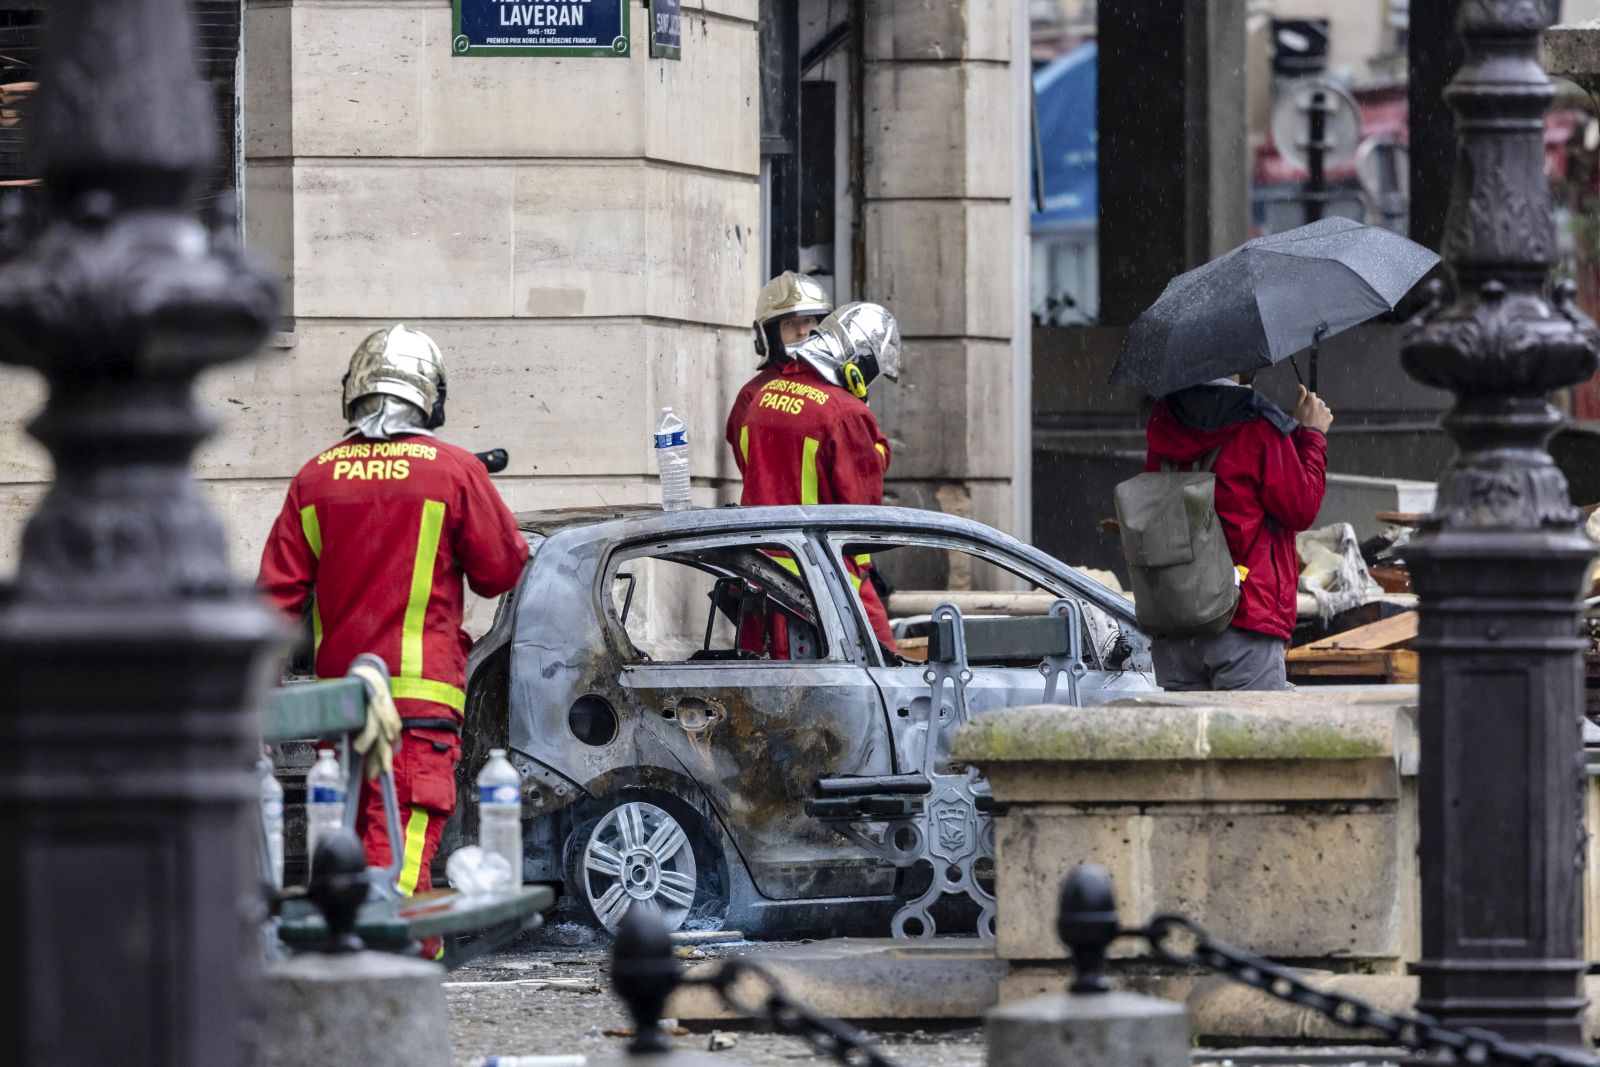 epa10705293 Emergency services members stand in front of a burned car as they work at the site of a collapsed building on 277 Rue Saint-Jacques, home of the Paris American Academy, a private fashion school, one day after an explosion occurred in Paris 5th arrondissement area, Paris, France, 22 June 2023. According to the French Interior Minister, four people were in critical condition and 34 others were seriously injured after an explosion in Paris 5th arrondissement on 21 June. Emergency services are still searching for people possibly stuck under the rubble, as the cause of the fire and the collapse are yet to be determined.  EPA/CHRISTOPHE PETIT TESSON